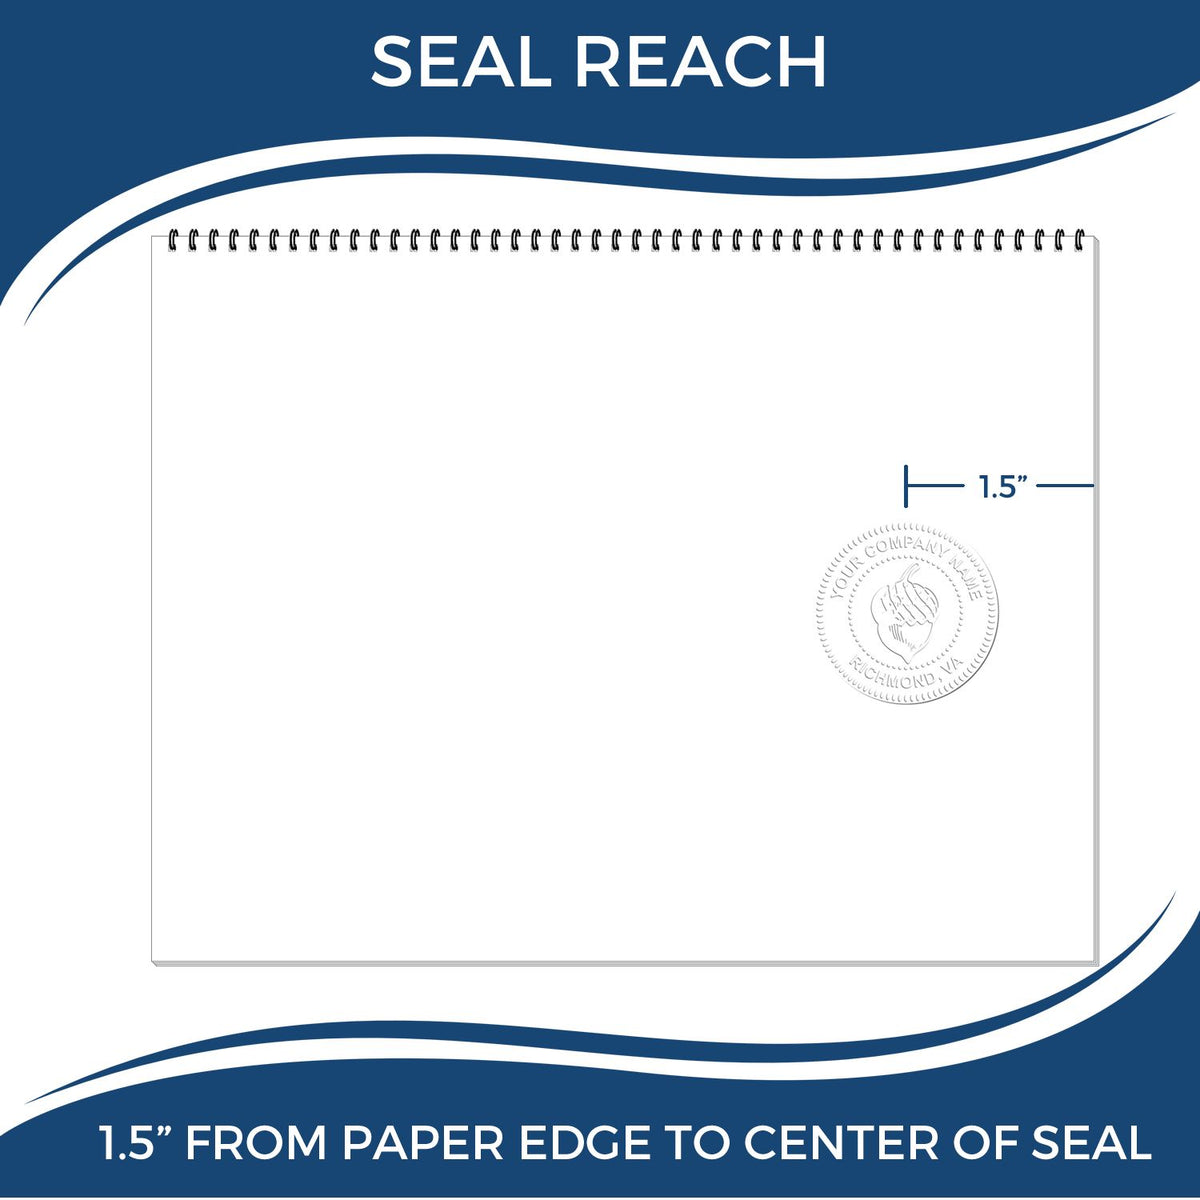 An infographic showing the seal reach which is represented by a ruler and a miniature seal image of the Soft Pocket Maryland Landscape Architect Embosser